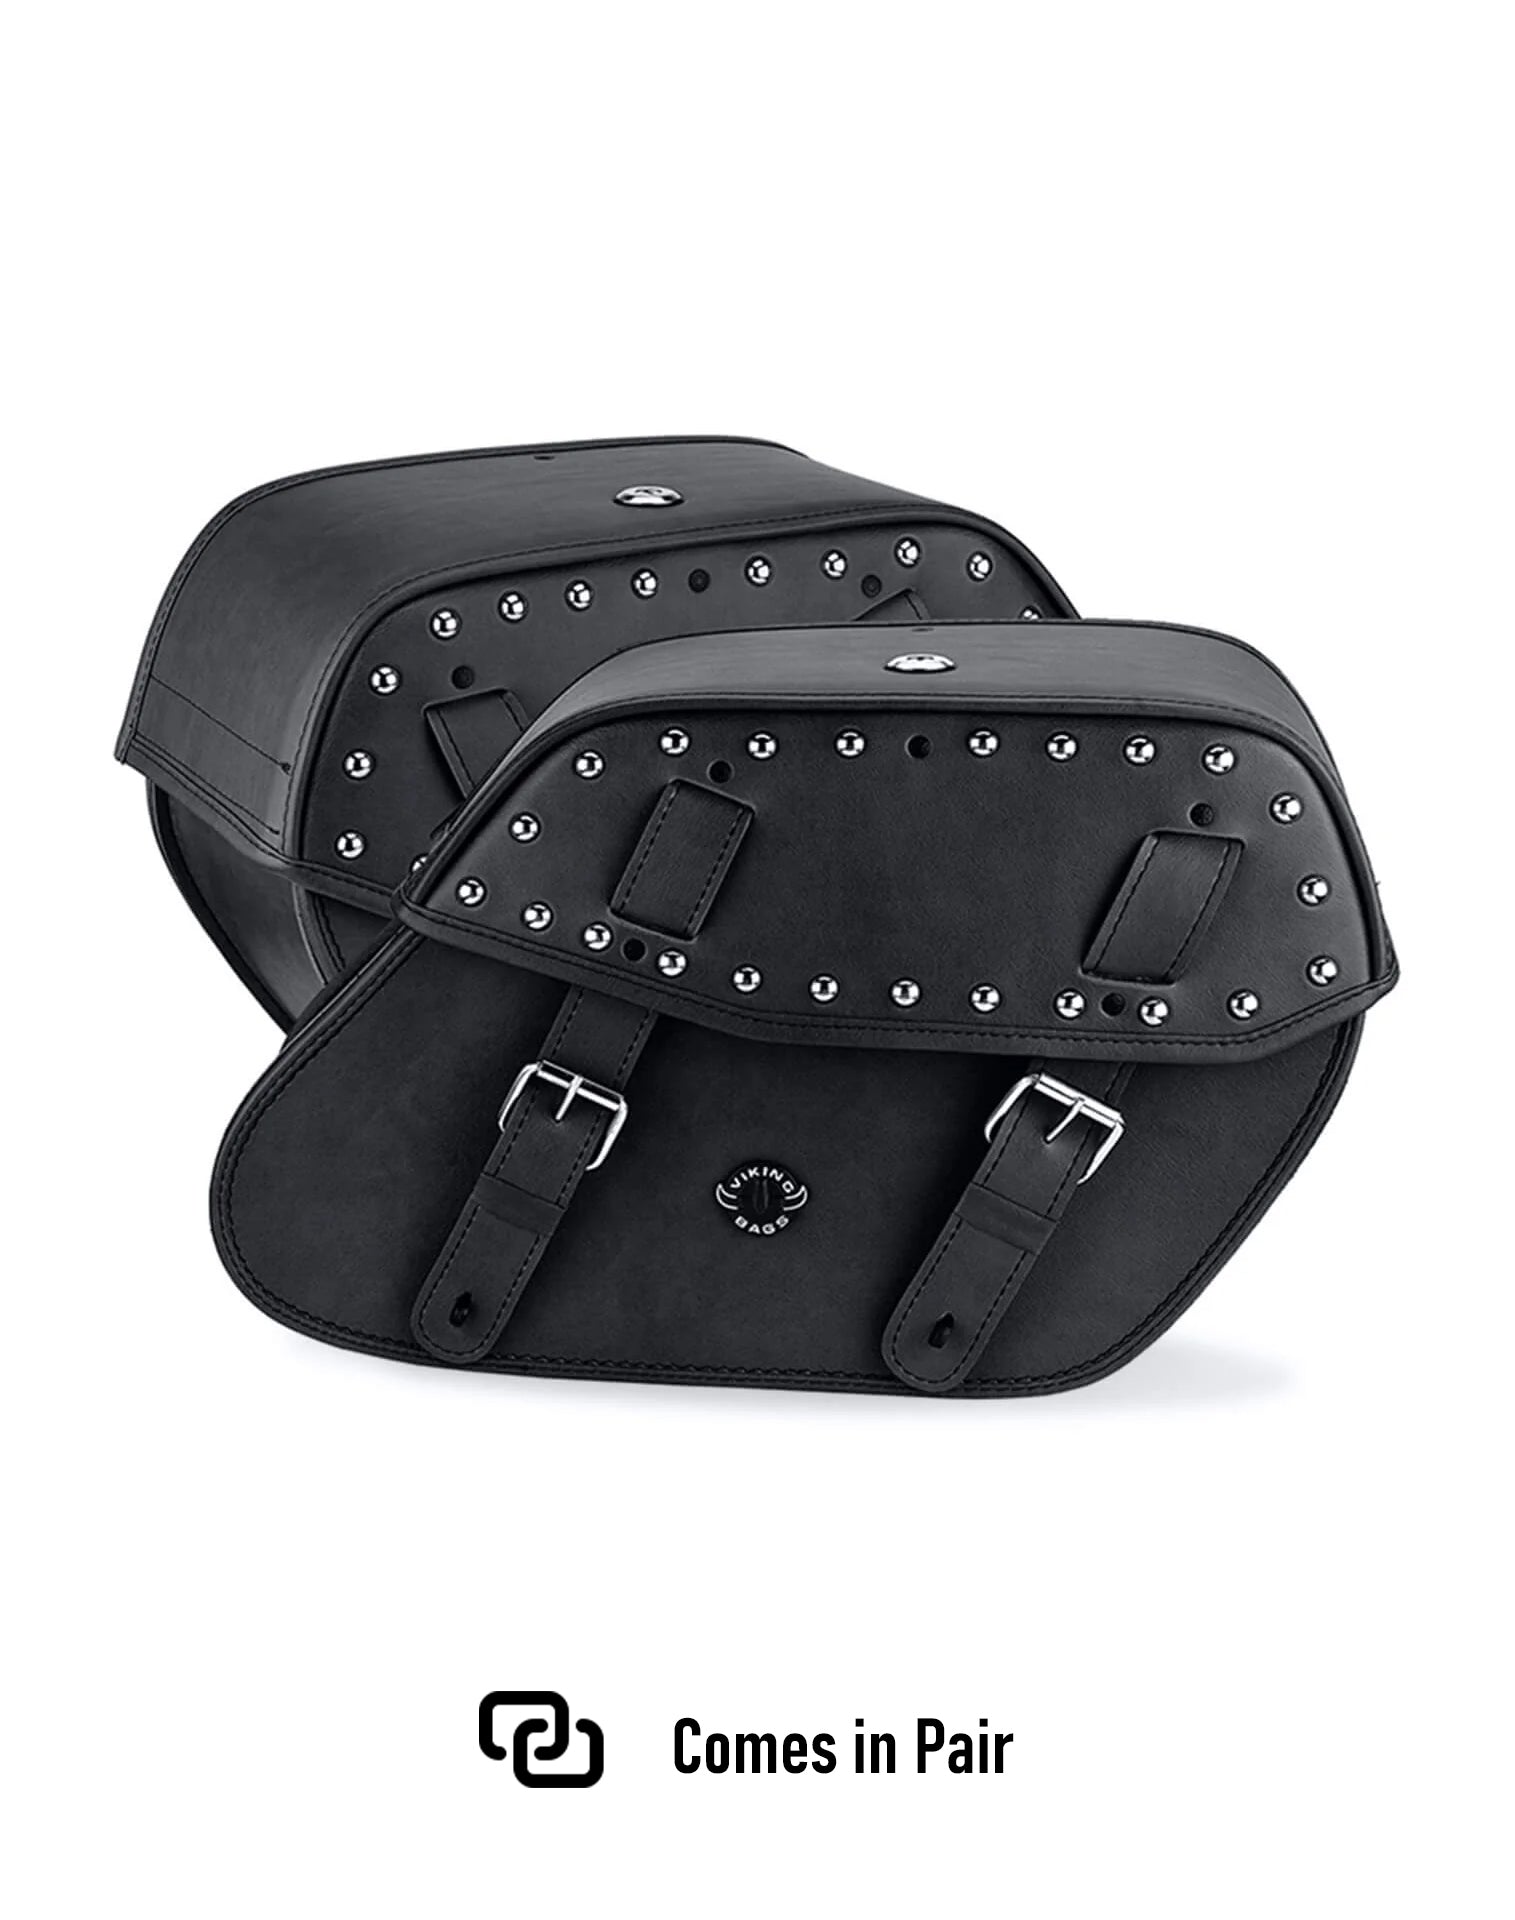 Viking Odin Large Yamaha V Star 1100 Classic Xvs11A Studded Leather Motorcycle Saddlebags Weather Resistant Bags Comes in Pair